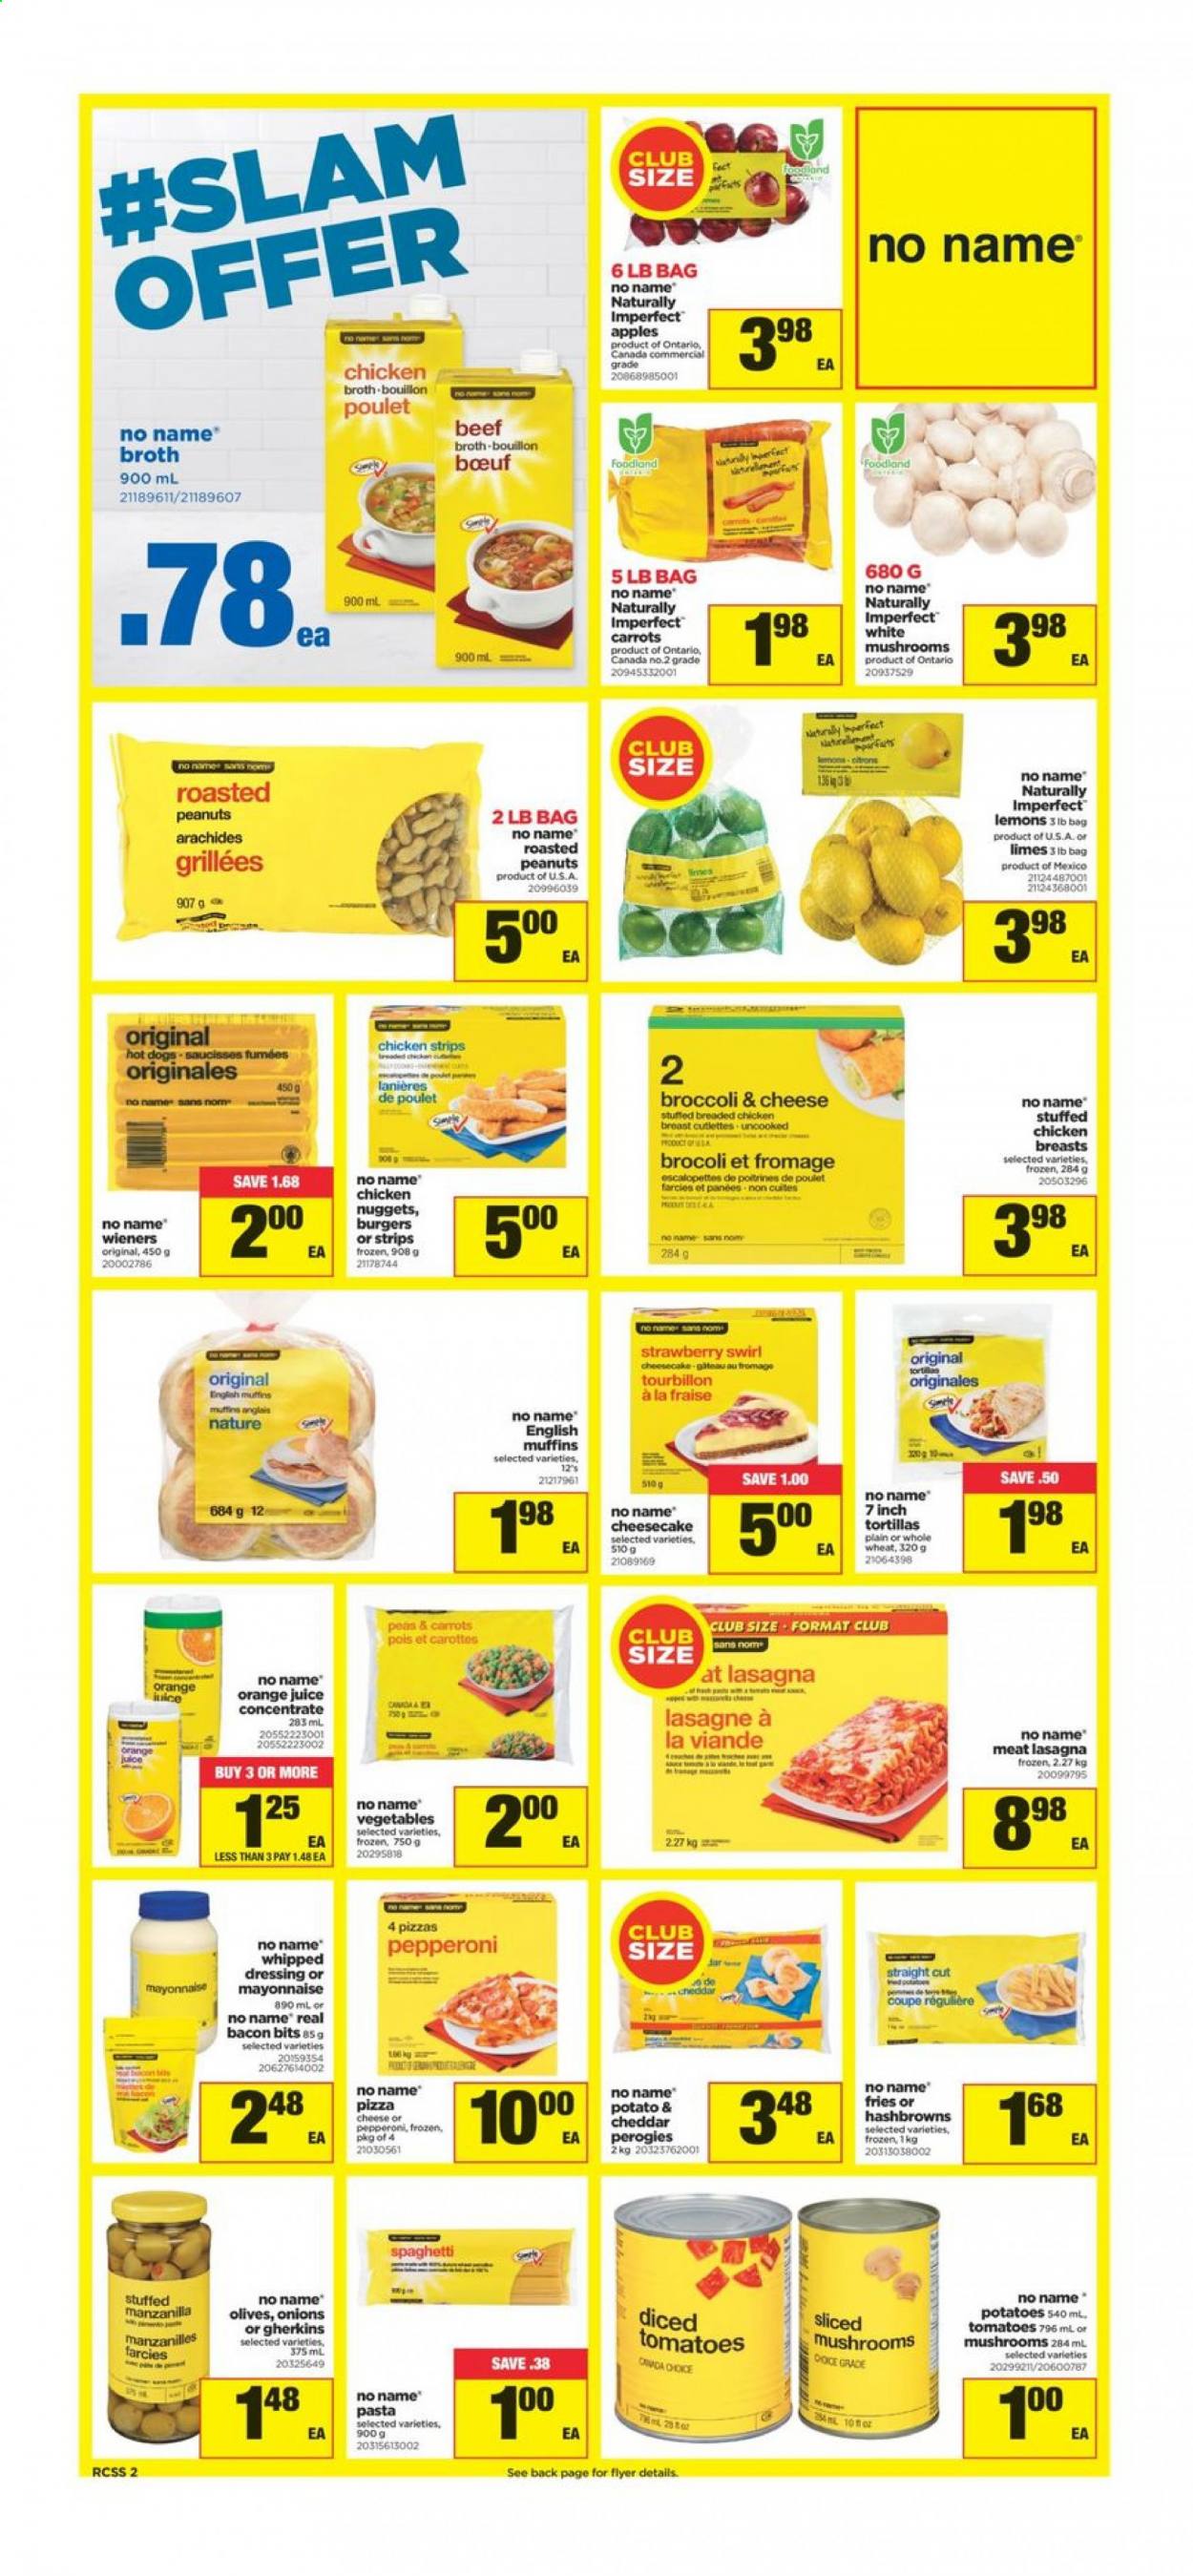 thumbnail - Real Canadian Superstore Flyer - January 07, 2021 - January 13, 2021 - Sales products - english muffins, tortillas, cheesecake, broccoli, carrots, potatoes, onion, apples, limes, lemons, No Name, spaghetti, hot dog, pizza, nuggets, hamburger, pasta, fried chicken, lasagna meal, stuffed chicken, mayonnaise, Ola, strips, chicken strips, hash browns, potato fries, bouillon, chicken broth, broth, bacon bits, dressing, roasted peanuts, peanuts, orange juice, juice, jar, olives. Page 3.